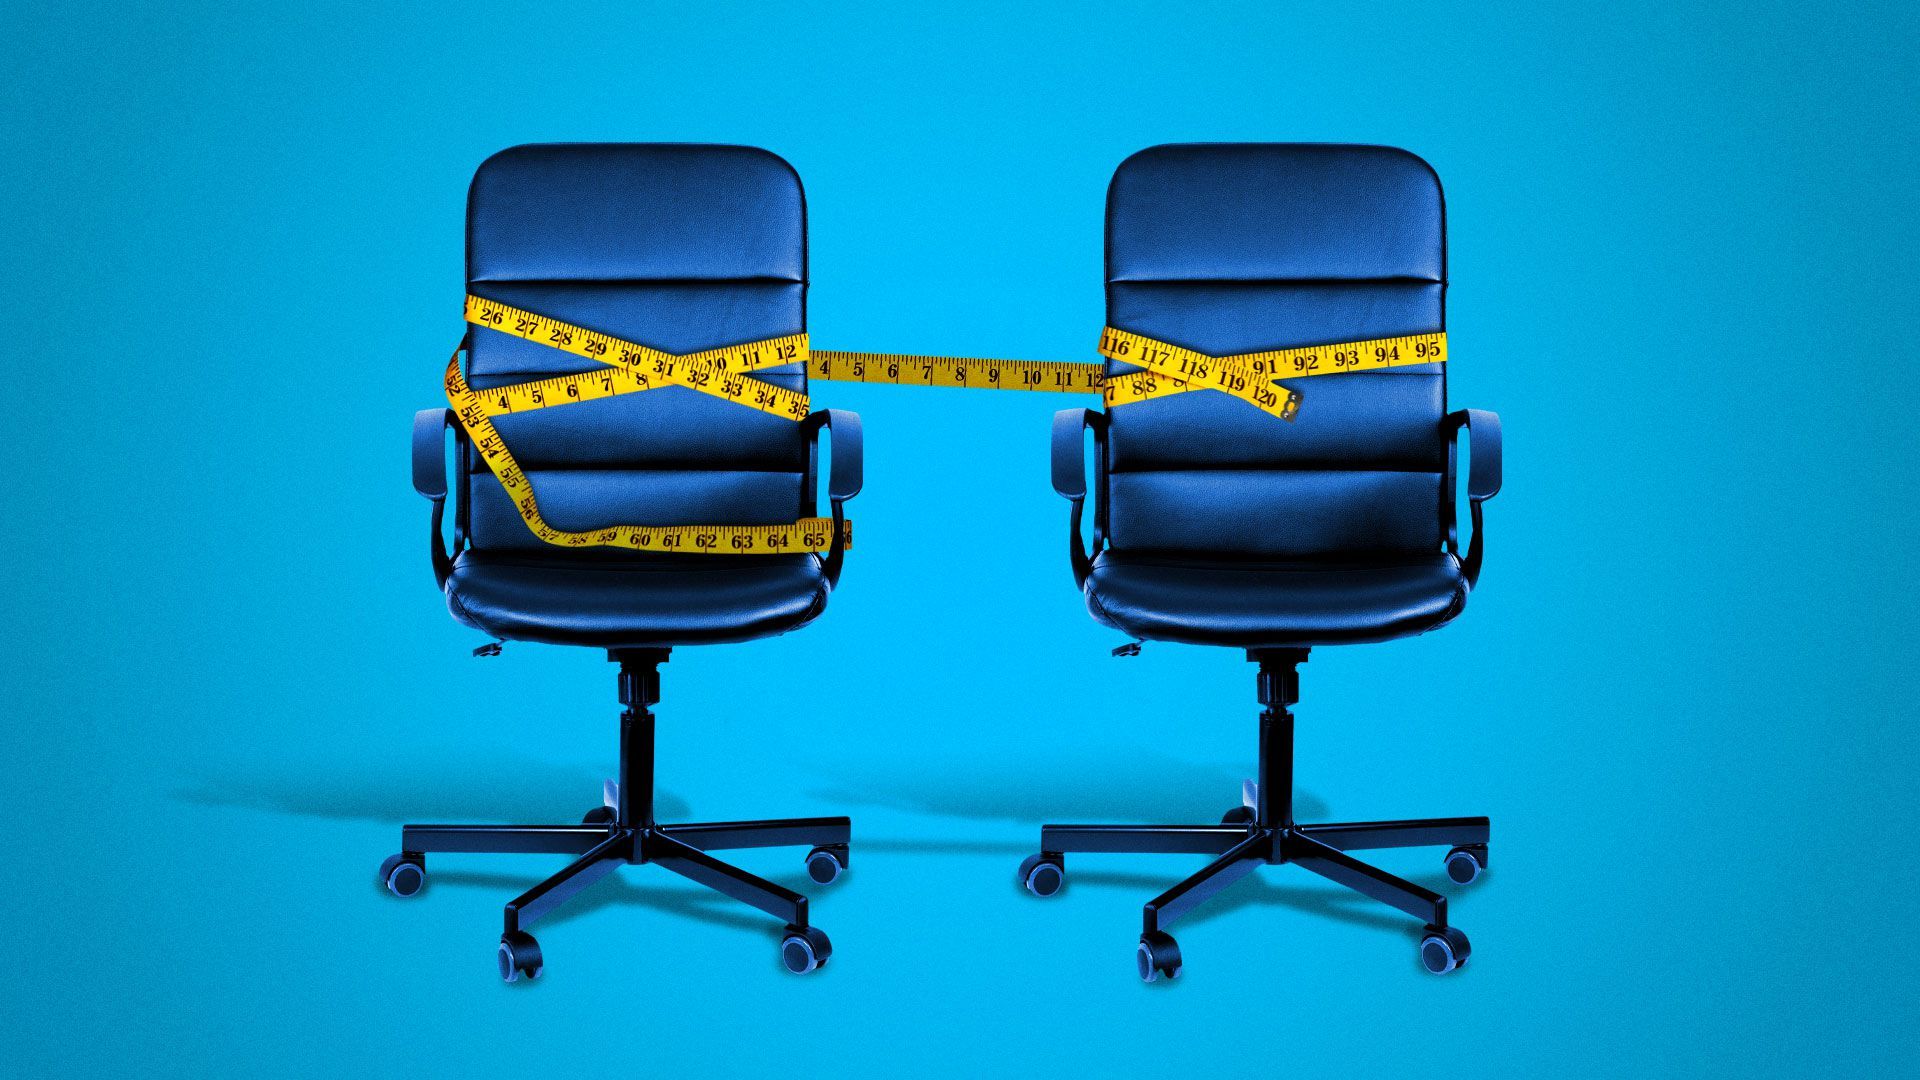 Illustration of office chairs with tape measure spacing them out